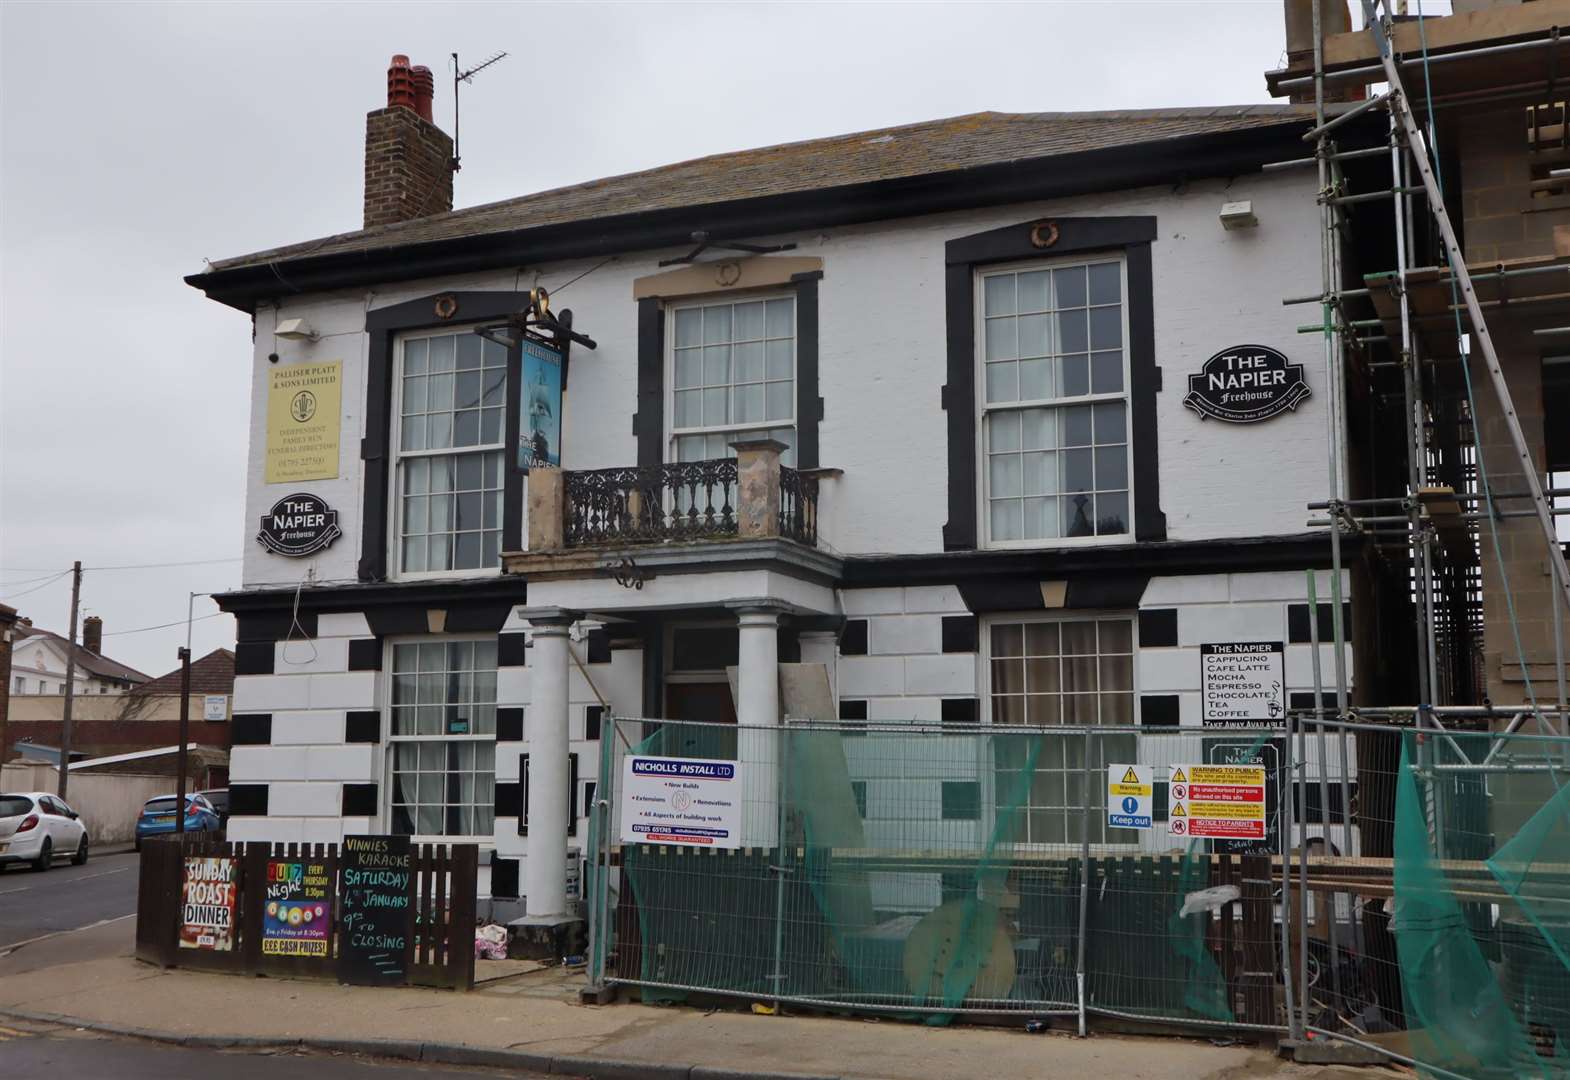 The Napier pub at the junction of Marine Parade and Alma Road, Sheerness